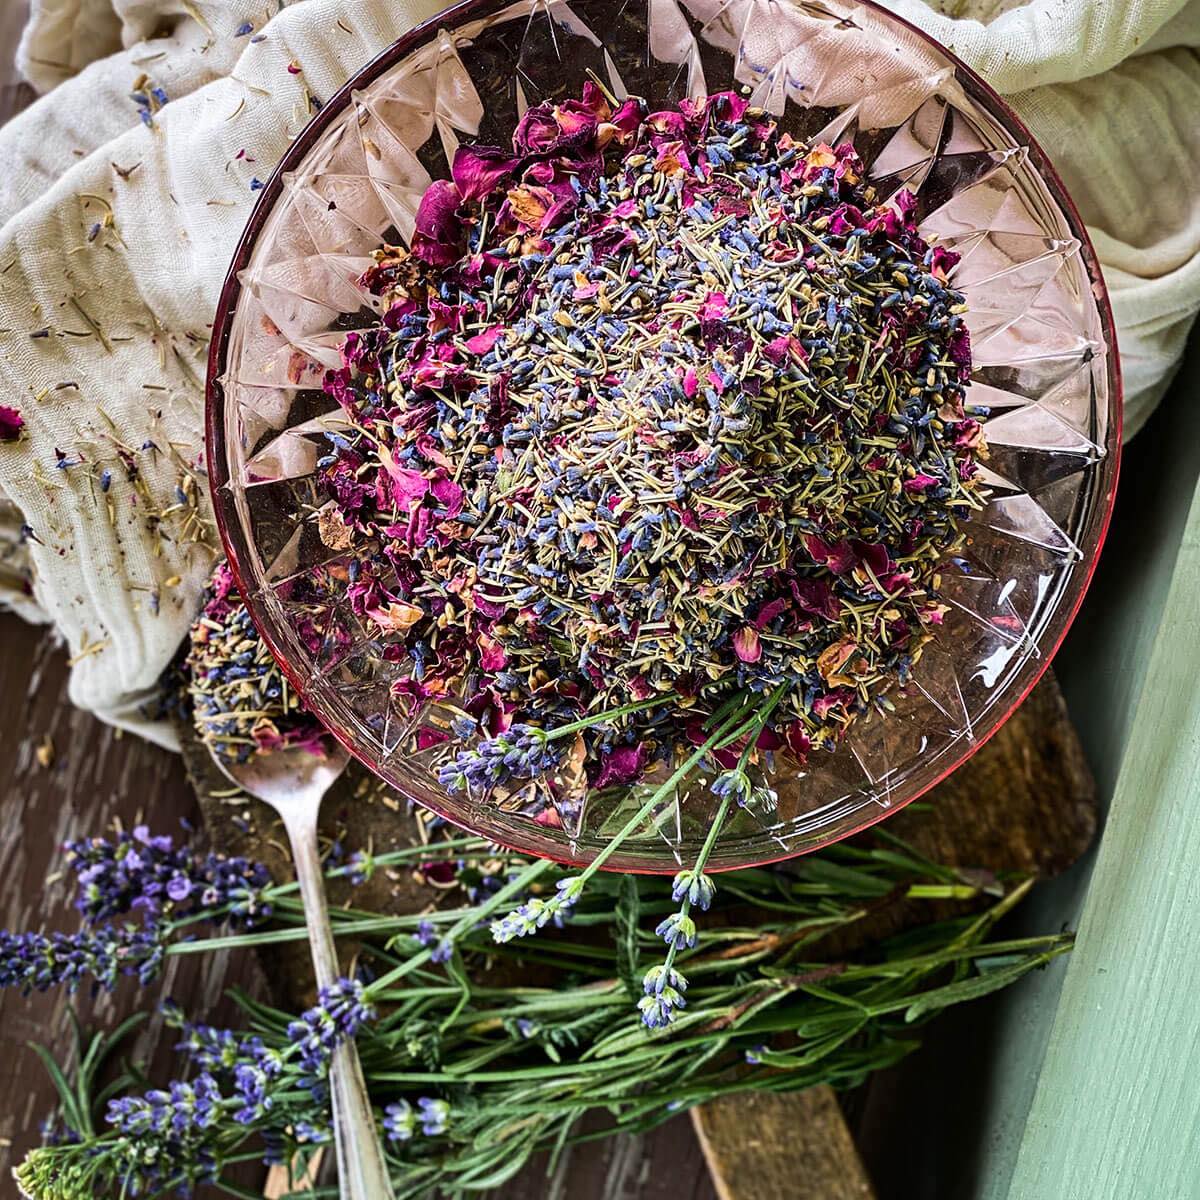 Herbal bath mix in a pink crystal bowl with fresh lavender and white cheesecloth in the background